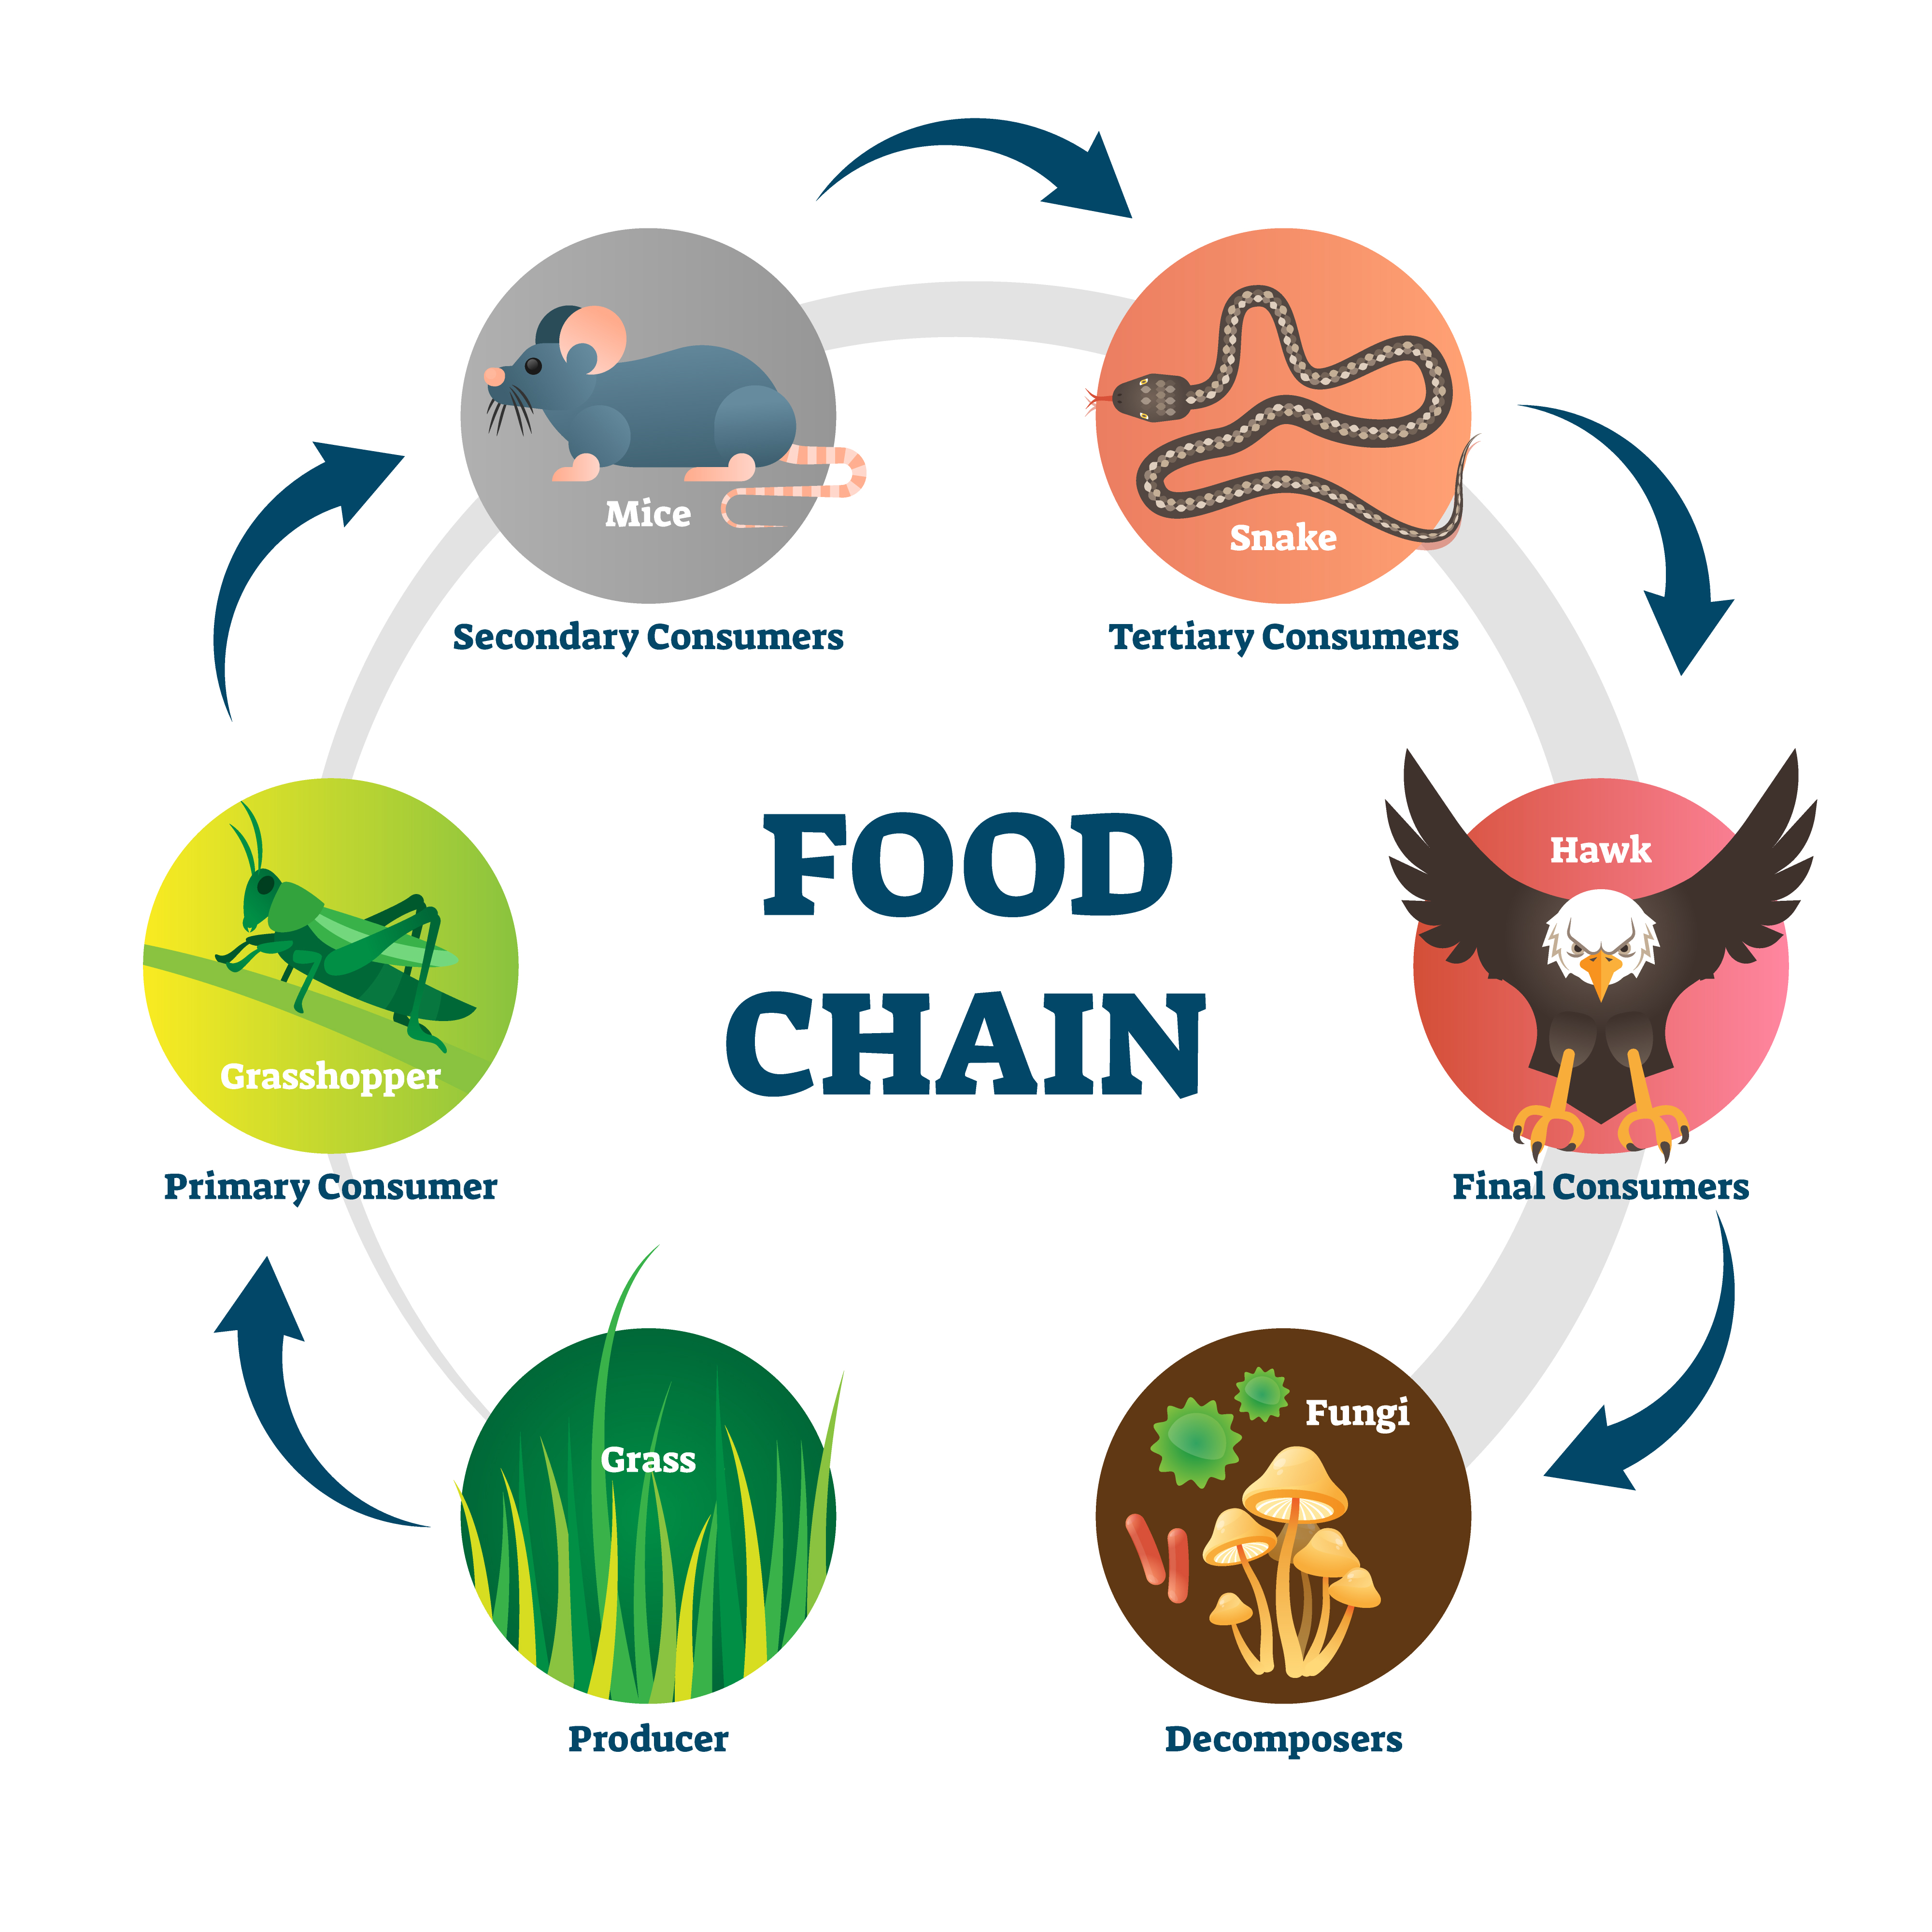 A typical food chain in the modern day world.